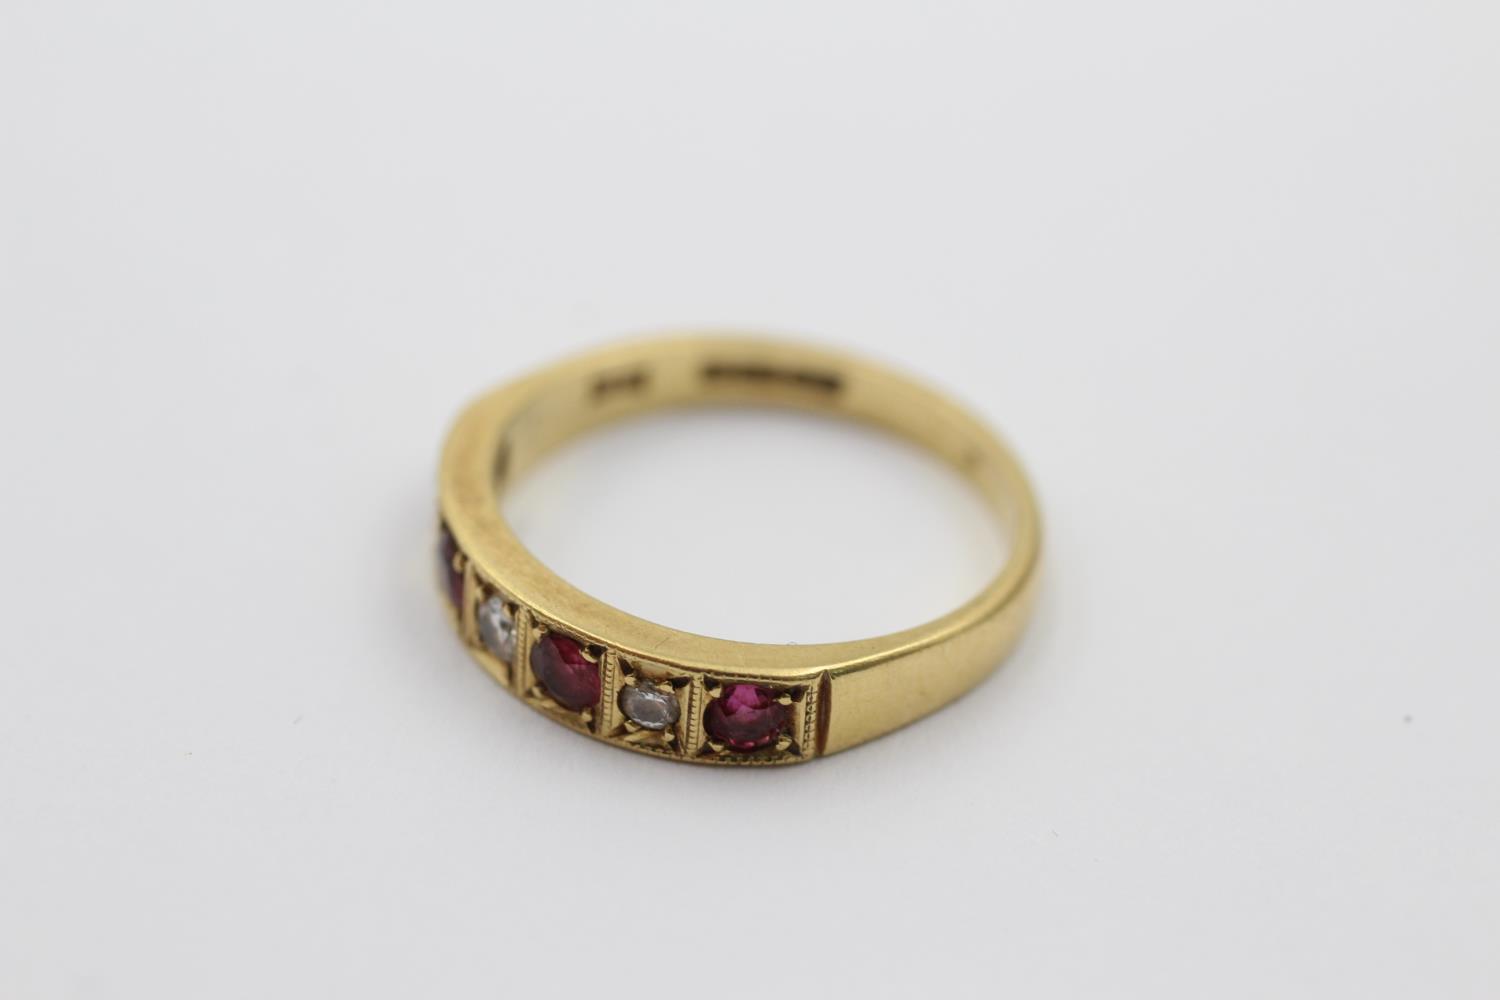 18ct gold ruby & diamond seven stone gypsy setting ring (3.4g) size O - Image 4 of 5